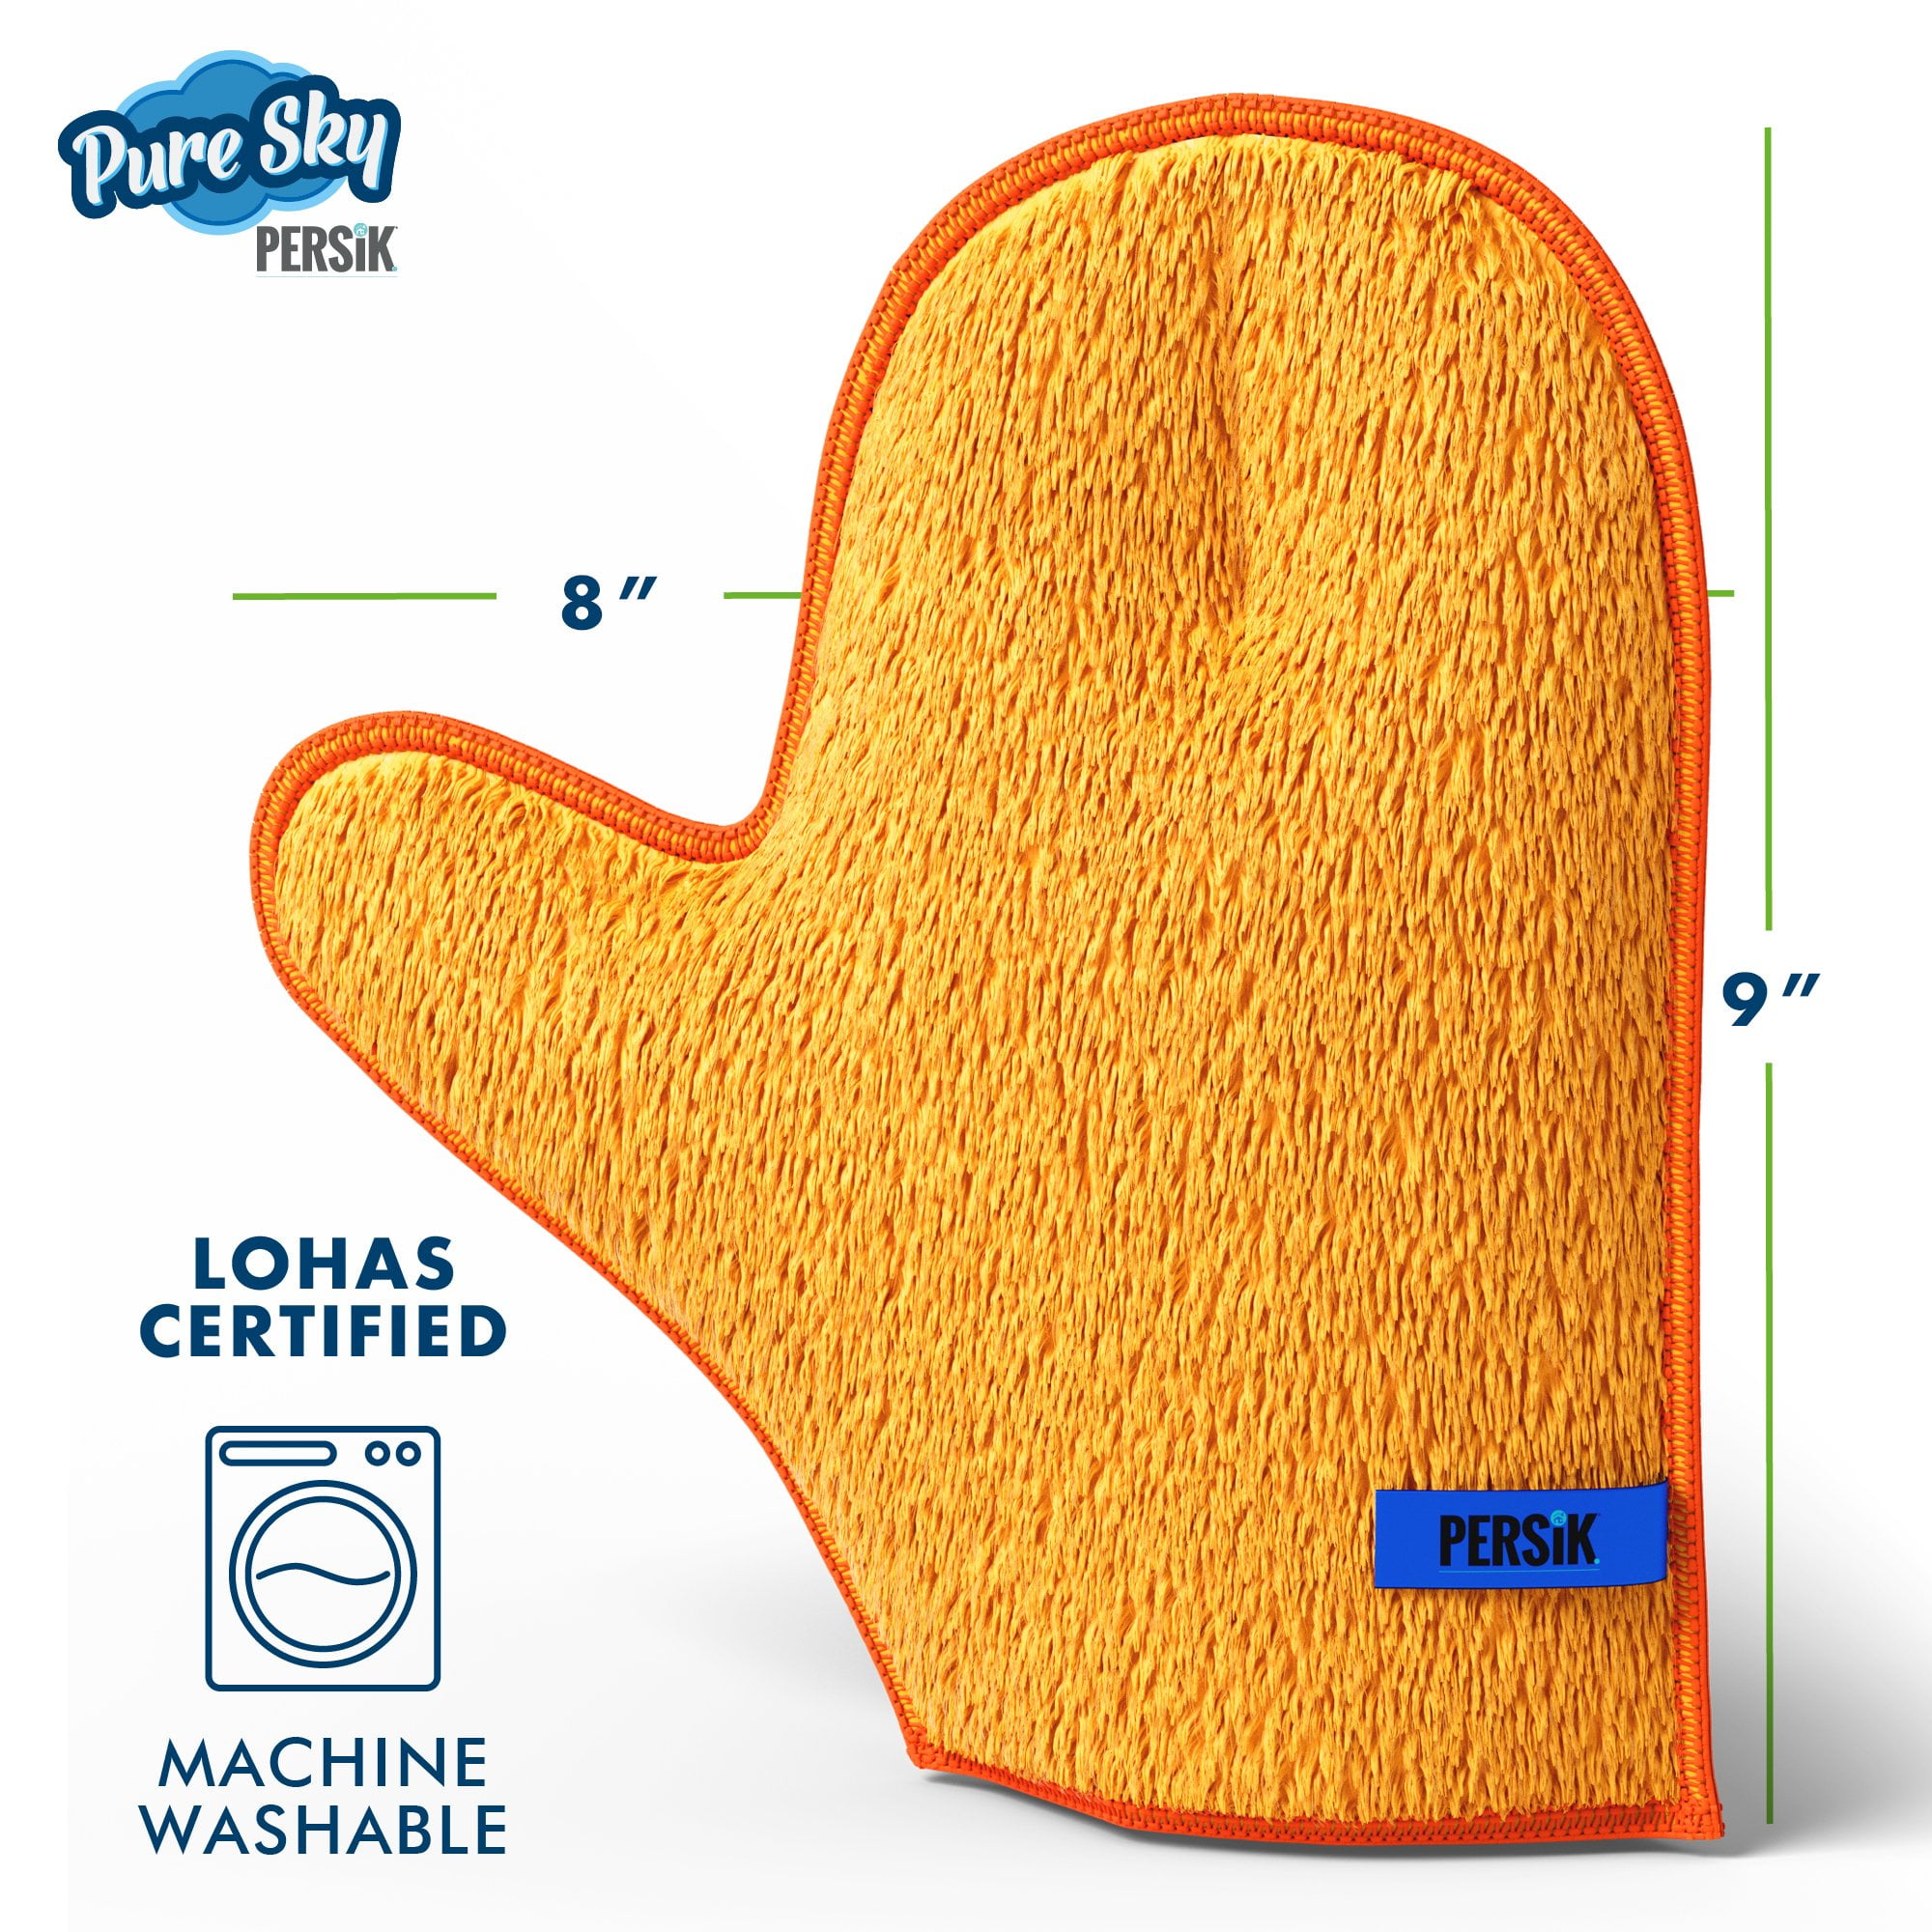 Dusting Free and + No Glove/MITT Cleaning Kitchen Ultra-Microfiber Detergents - Pure-Sky + Cleaning and Cleaning - JUST Water Needed ADD Towel Cleaning Includes Cloth Glass Streak Window Sponge